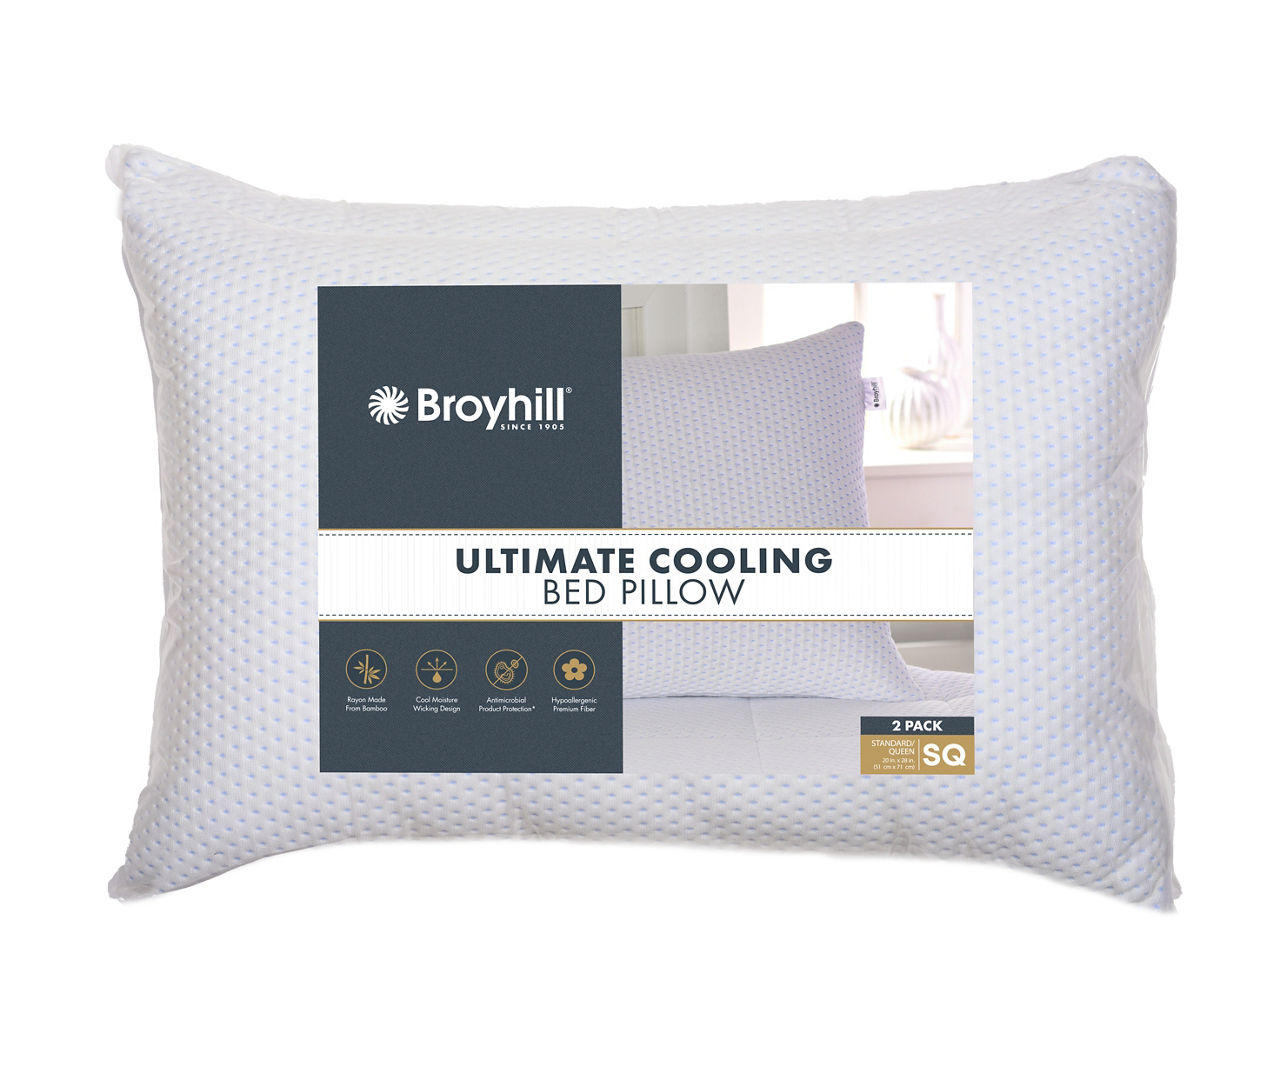 Broyhill Broyhill White Ultimate Cooling Pillows, 2-Pack | Big Lots